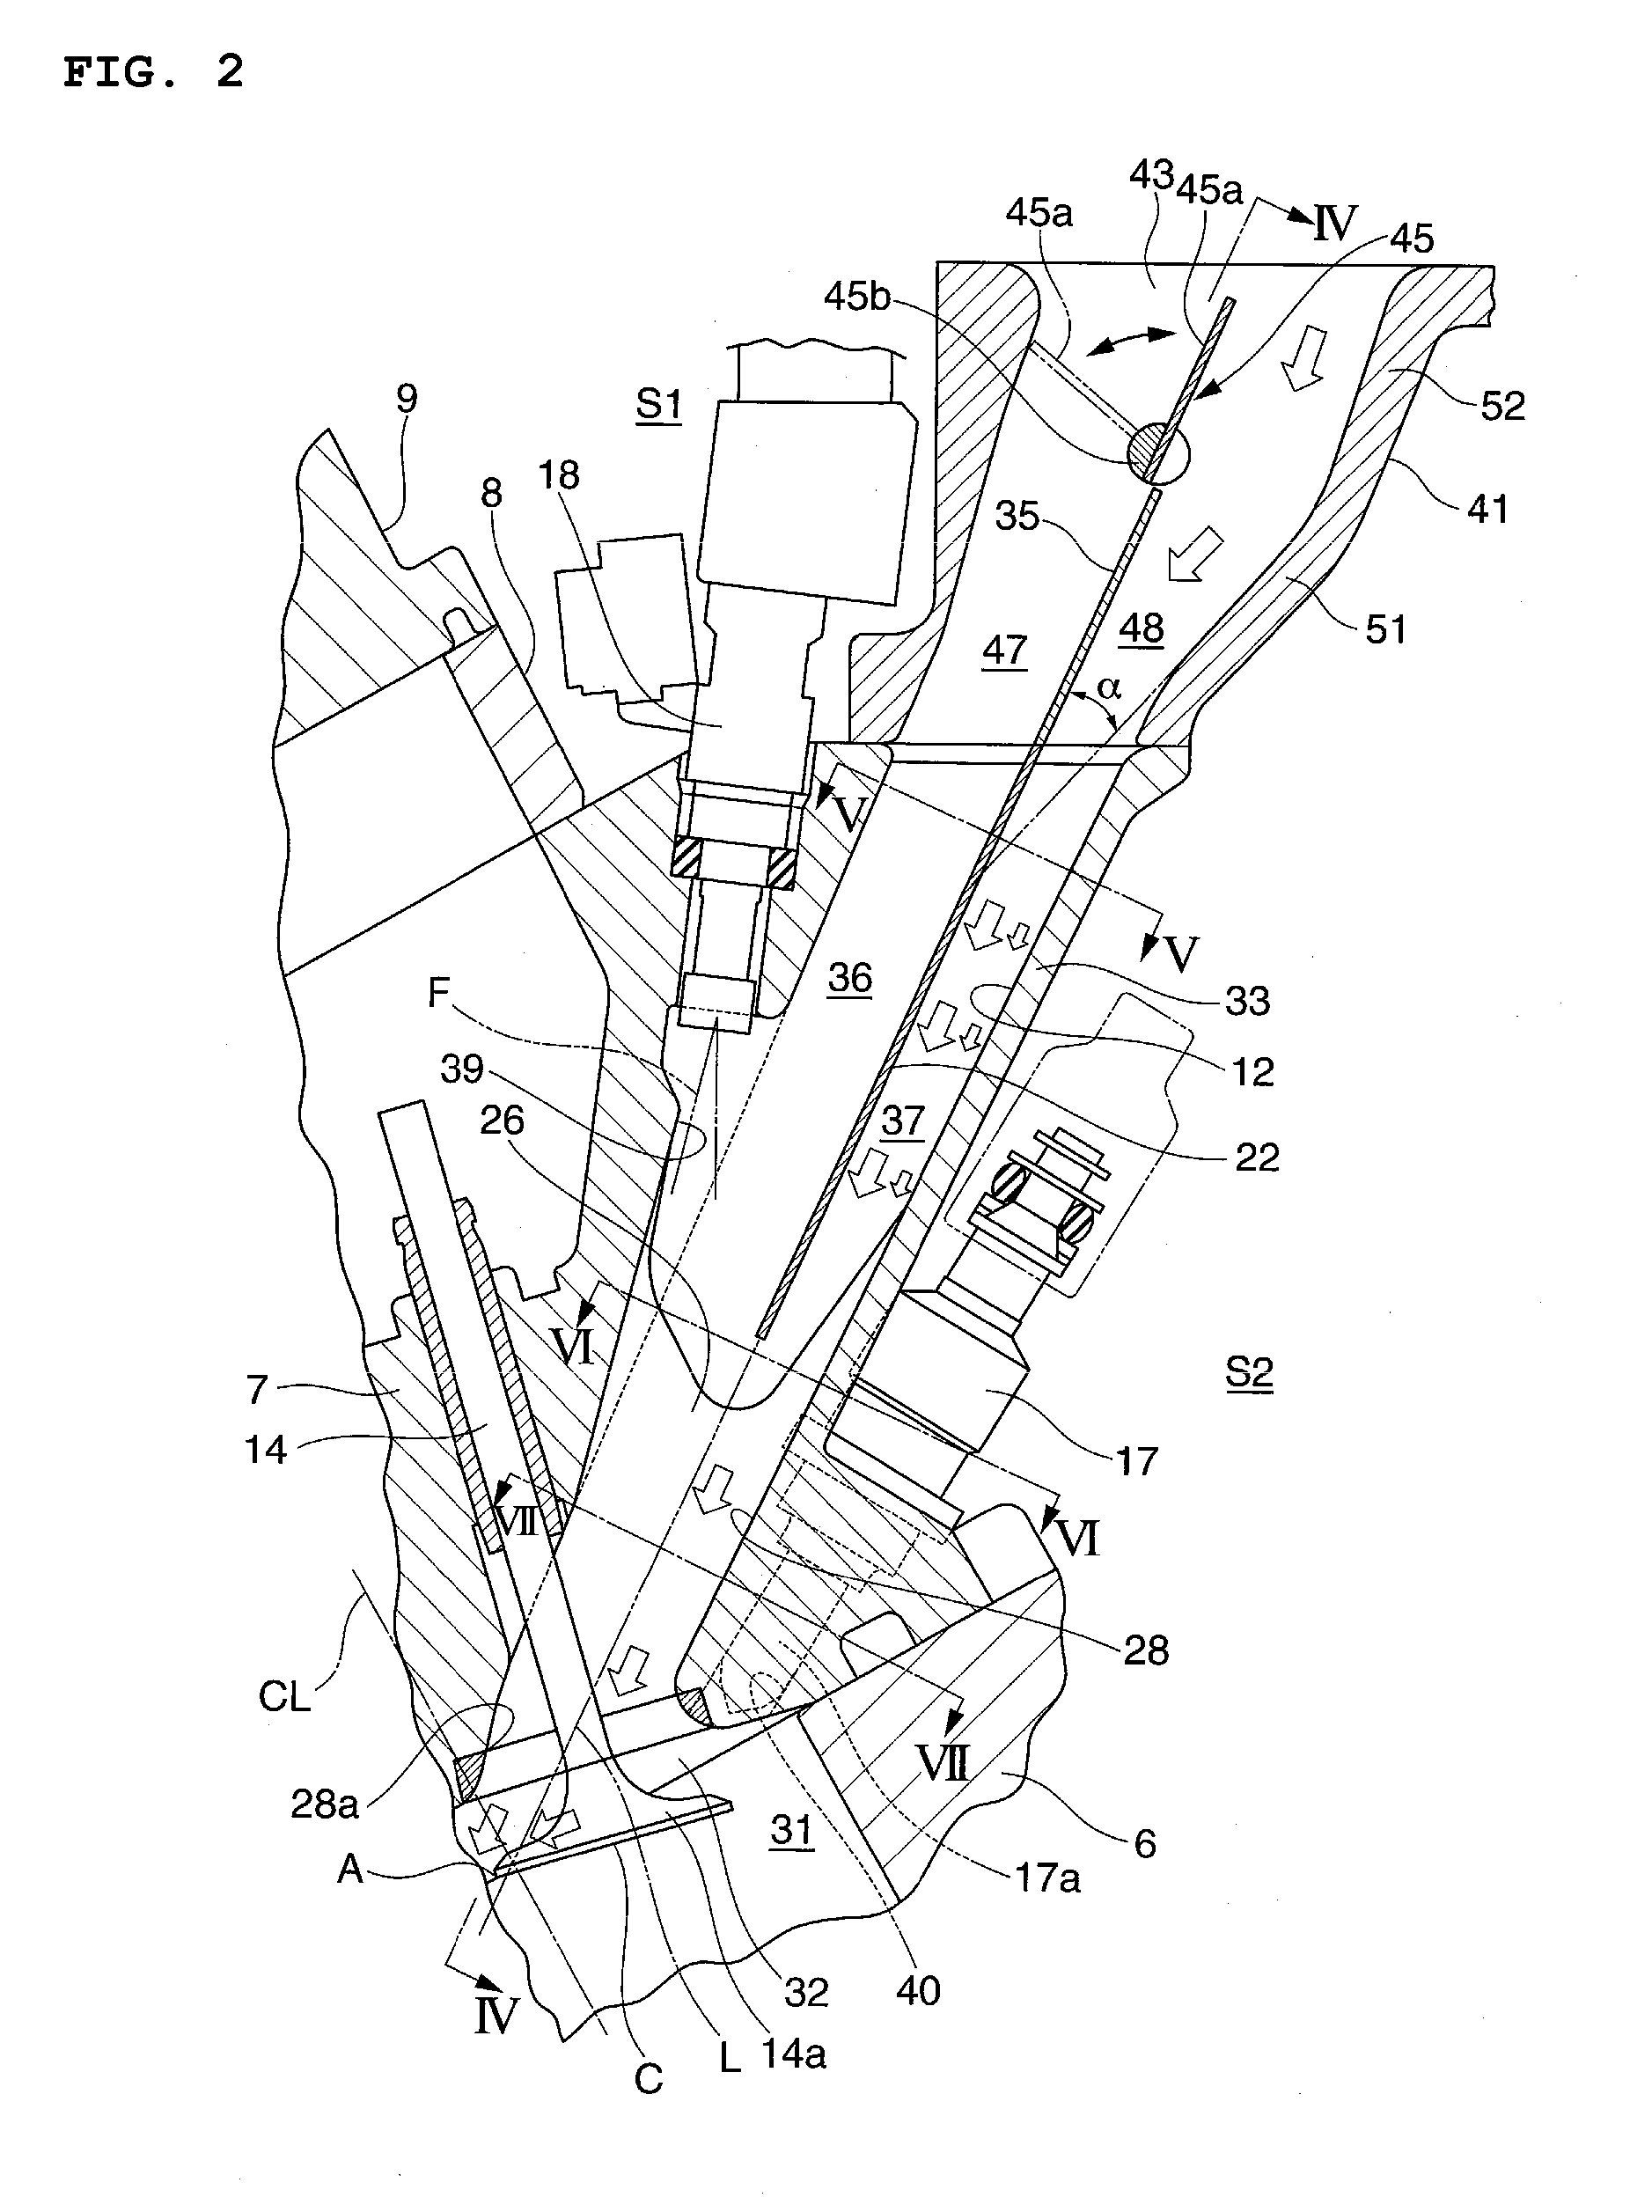 Intake control device for an engine